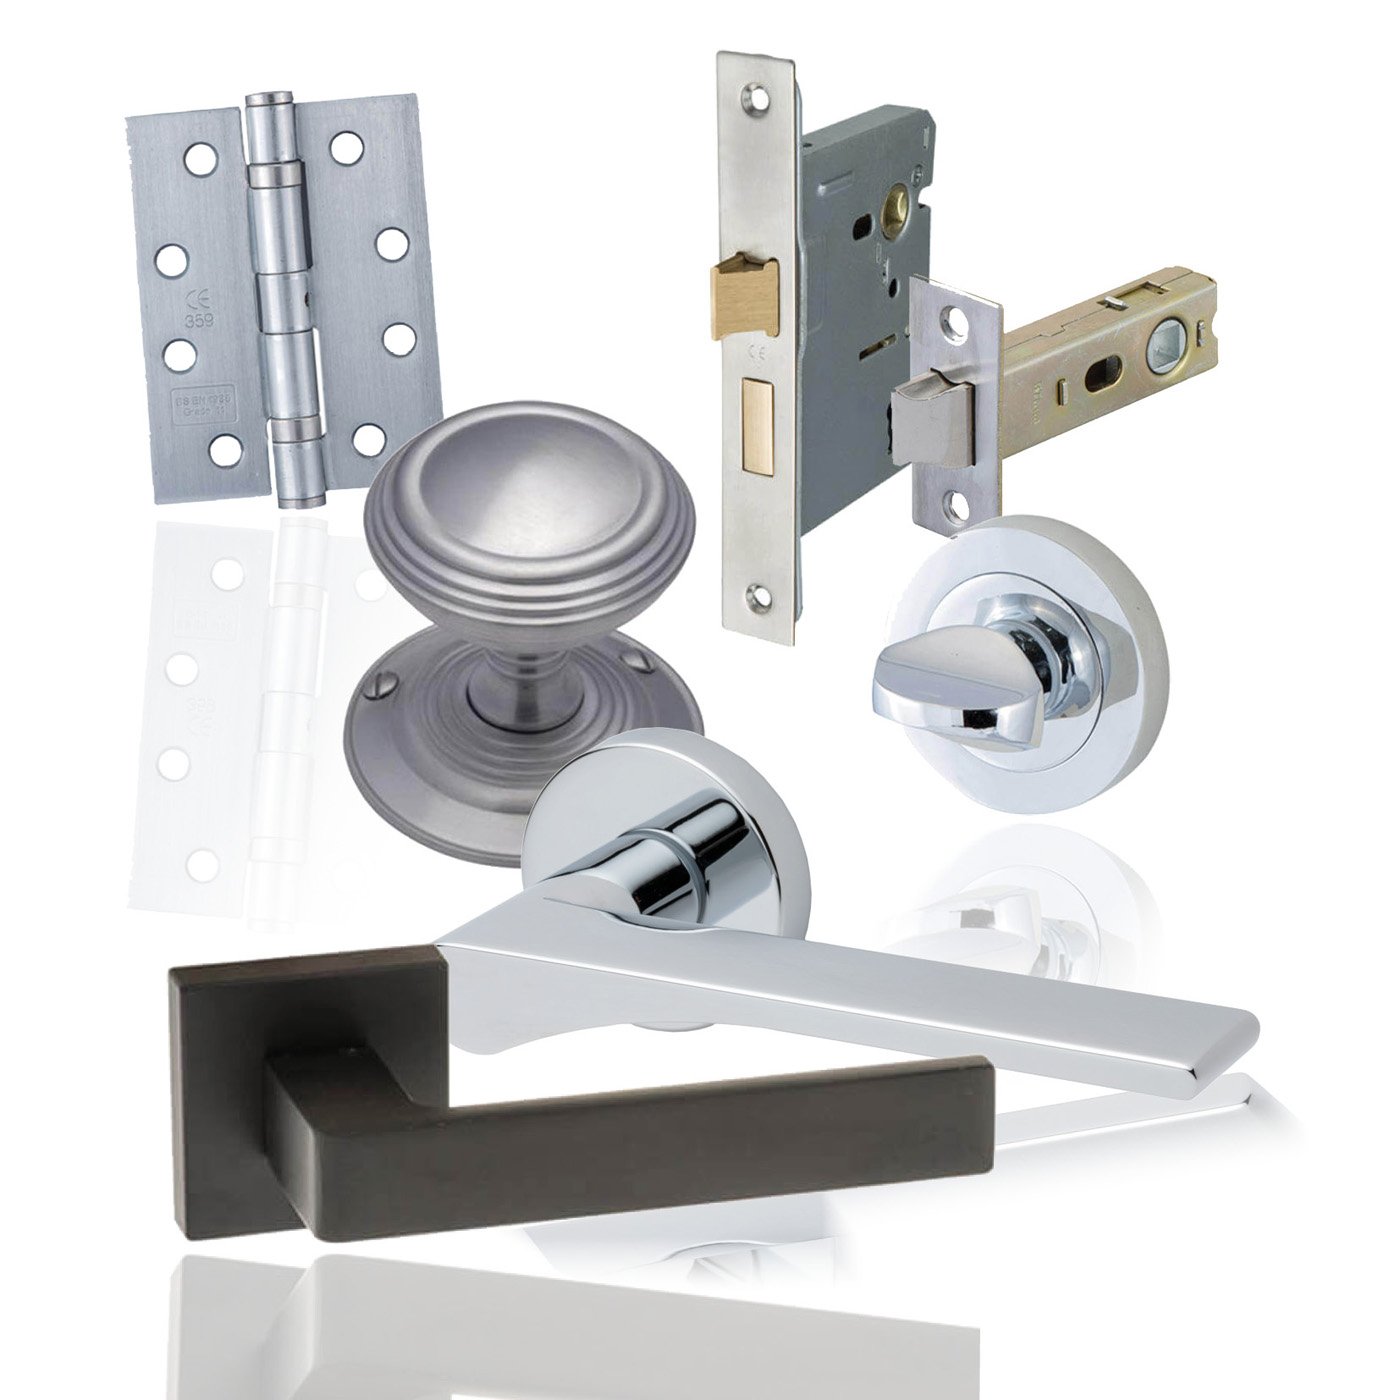 Ironmongery Architectural Drawing - Accuride 1312 for light duty pivot sliding doors - max - Products like door handles and window fittings, for example, can help to bind a style of design together.